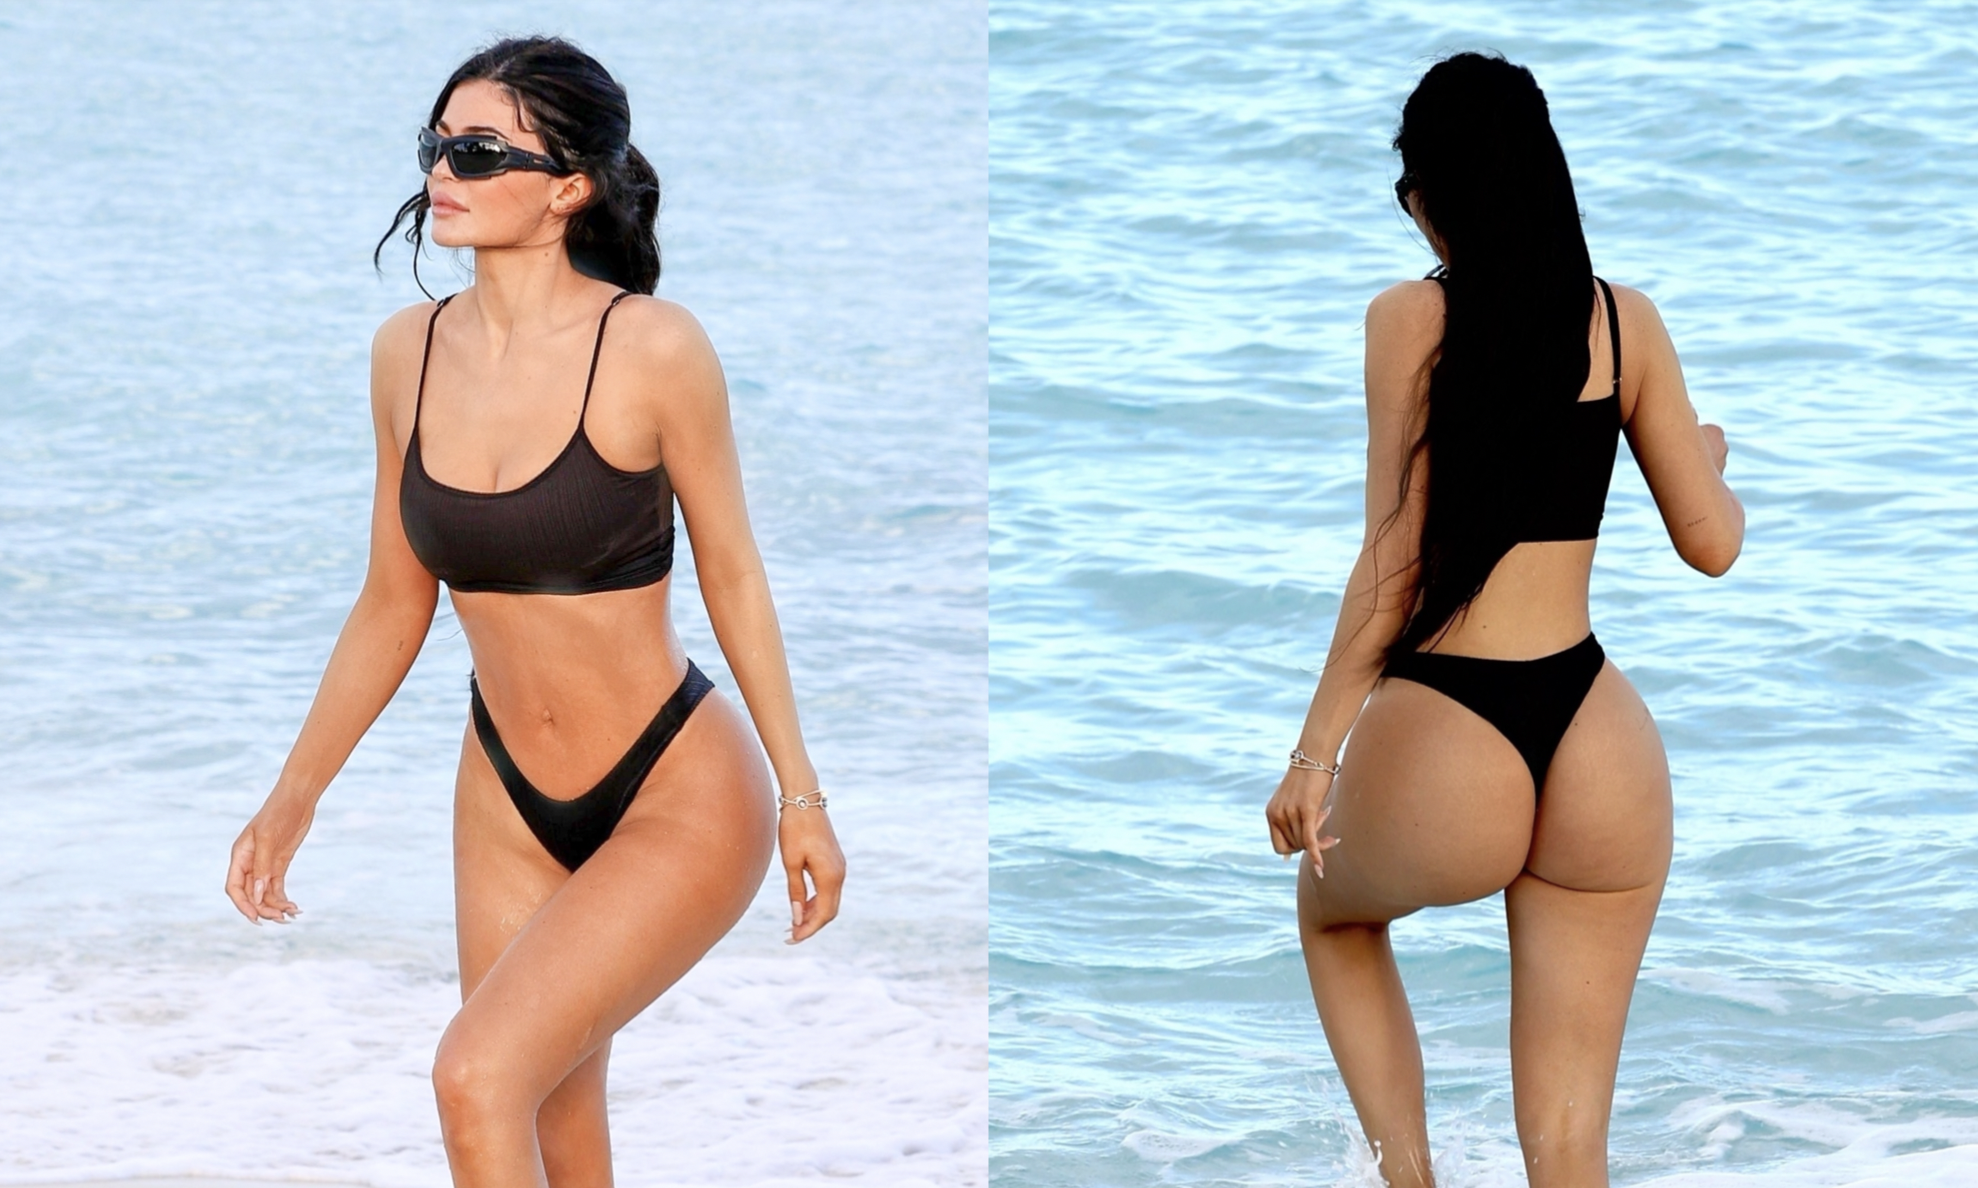 Celebrity Beach Sex Voyeur - Kylie Jenner Spotted in Thong Bikini During Solo Beach Vacation